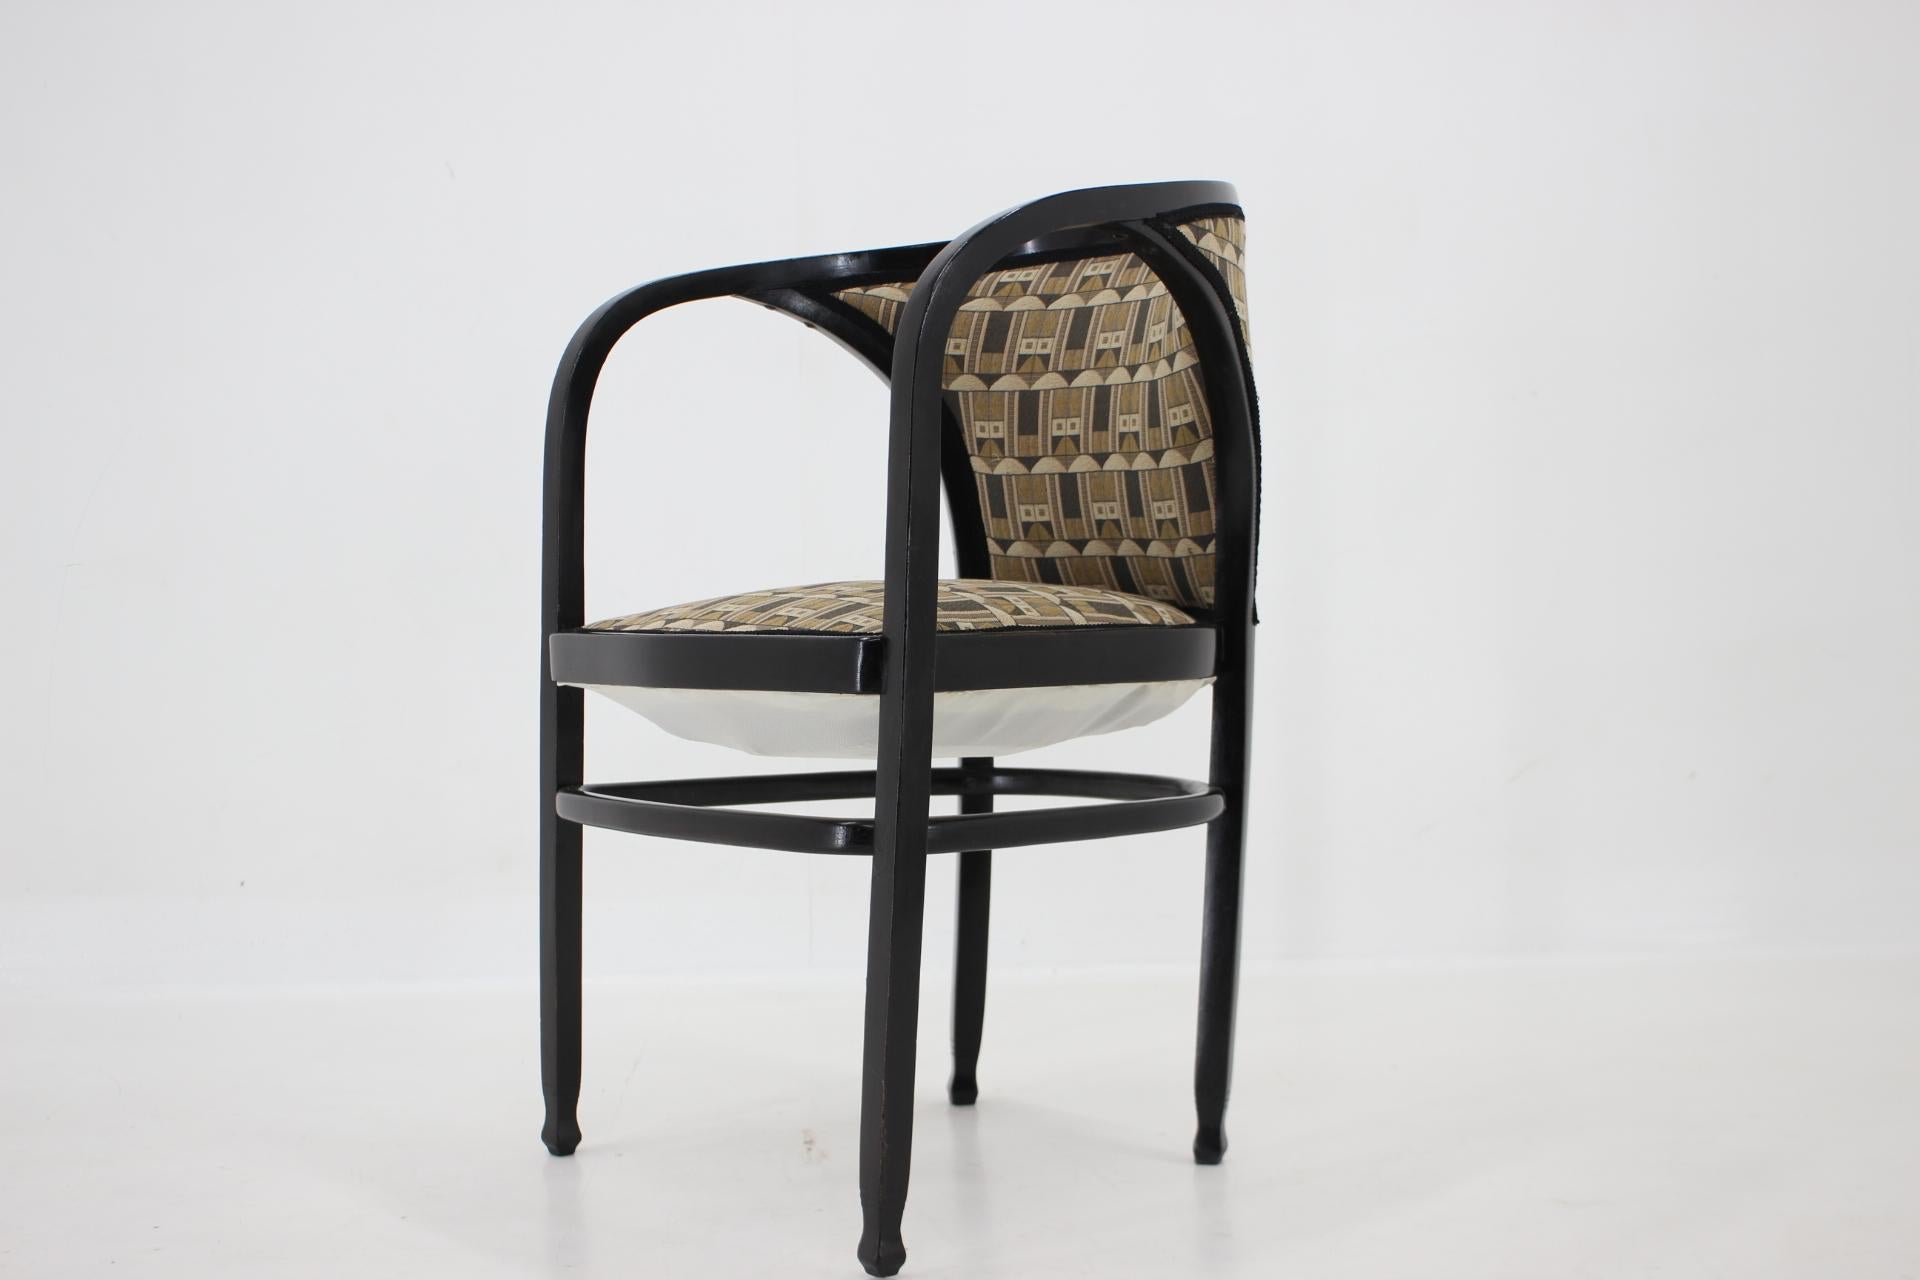 - newly upholstered in Backhausen fabric 
- carefully refurbished and finished with ebony shellac
- Height of seat 47 cm.